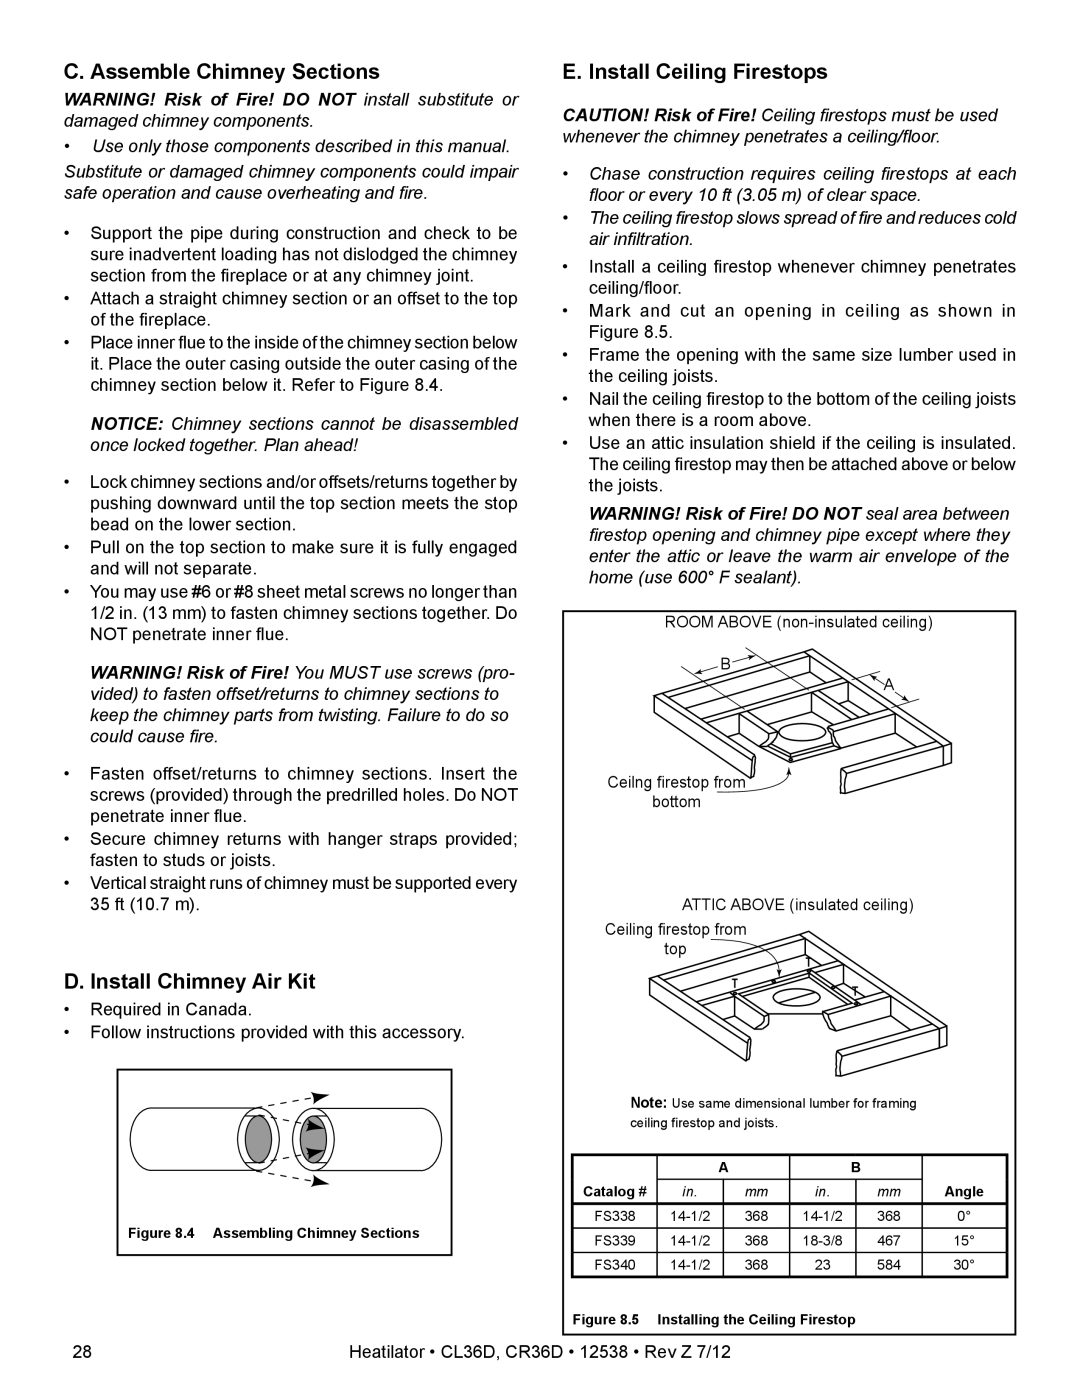 Heatiator CL36D owner manual C. Assemble Chimney Sections, D. Install Chimney Air Kit, E. Install Ceiling Firestops 